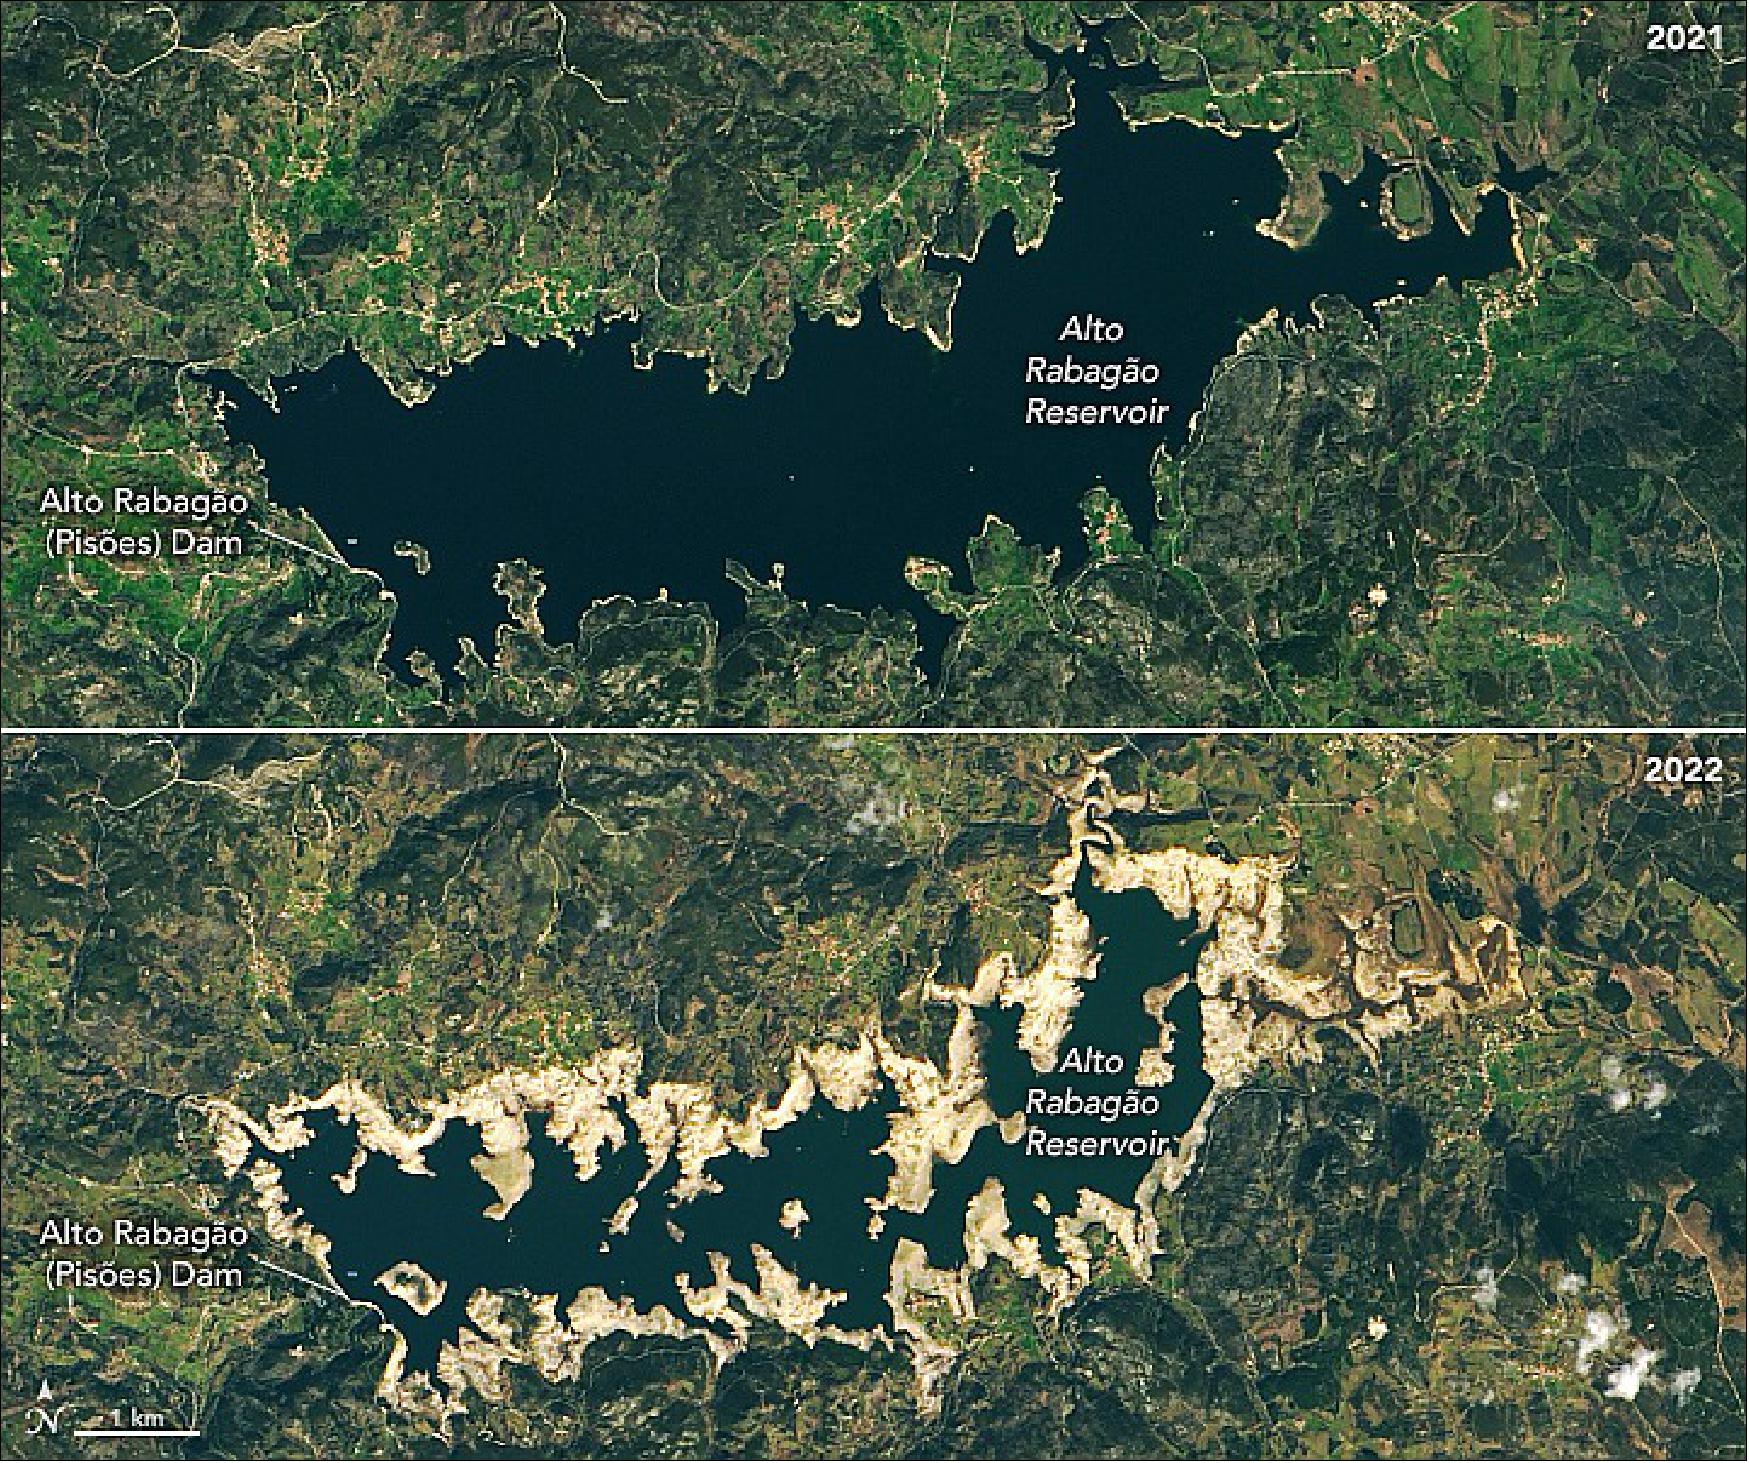 Figure 75: Water levels of the Alto Rabagão Reservoir on March 6, 2021 and February 5, 2022 (image credit: NASA Earth Observatory)